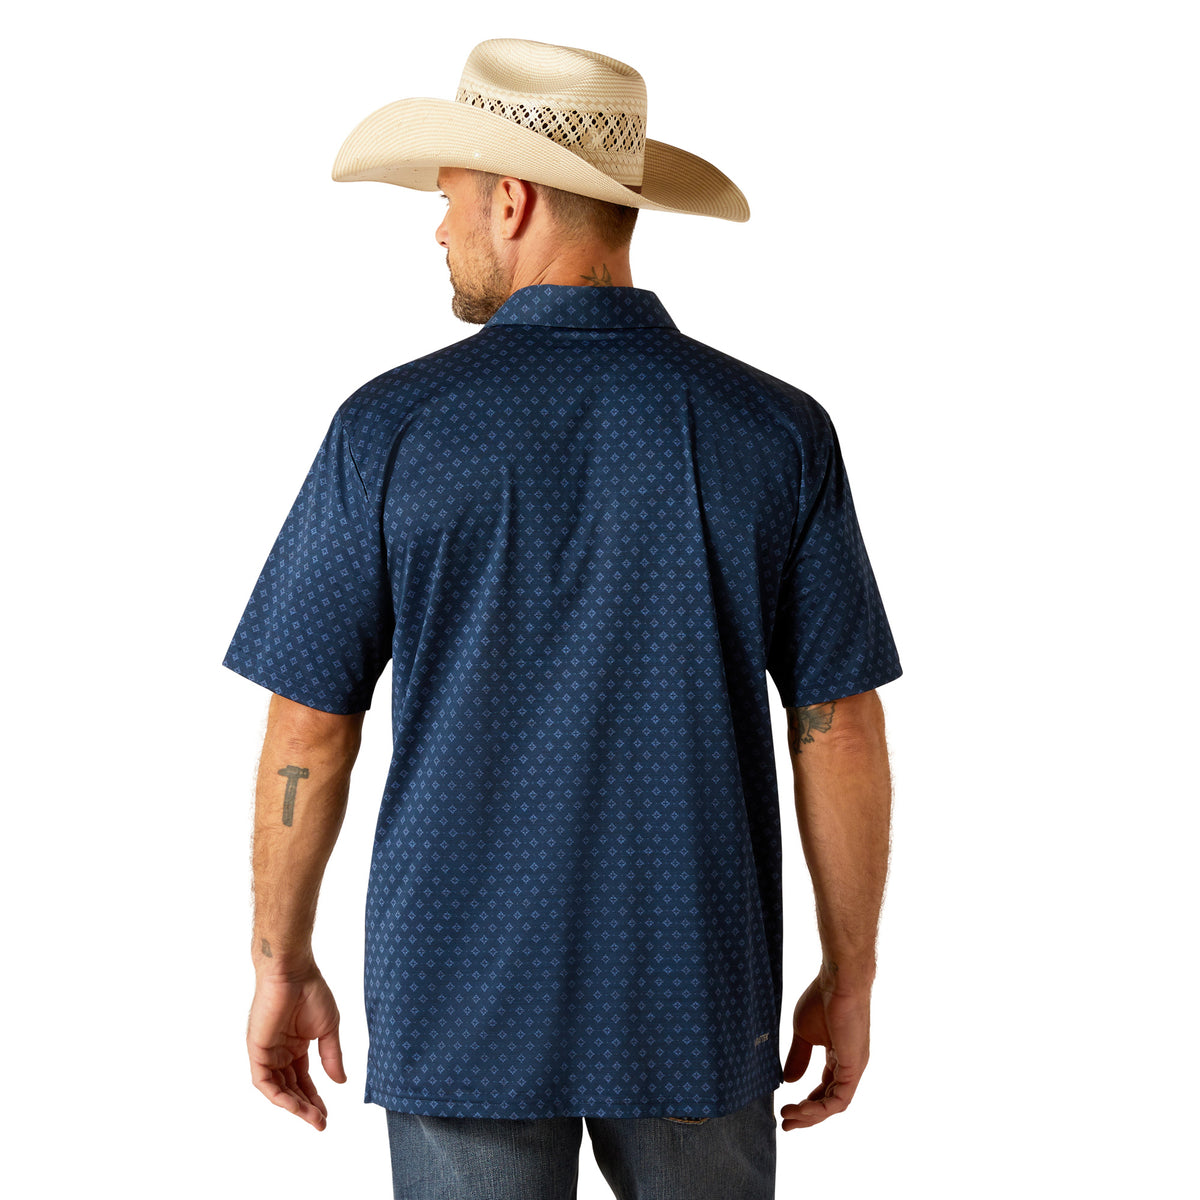 Ariat Men's Charger 2.0 Printed Polo